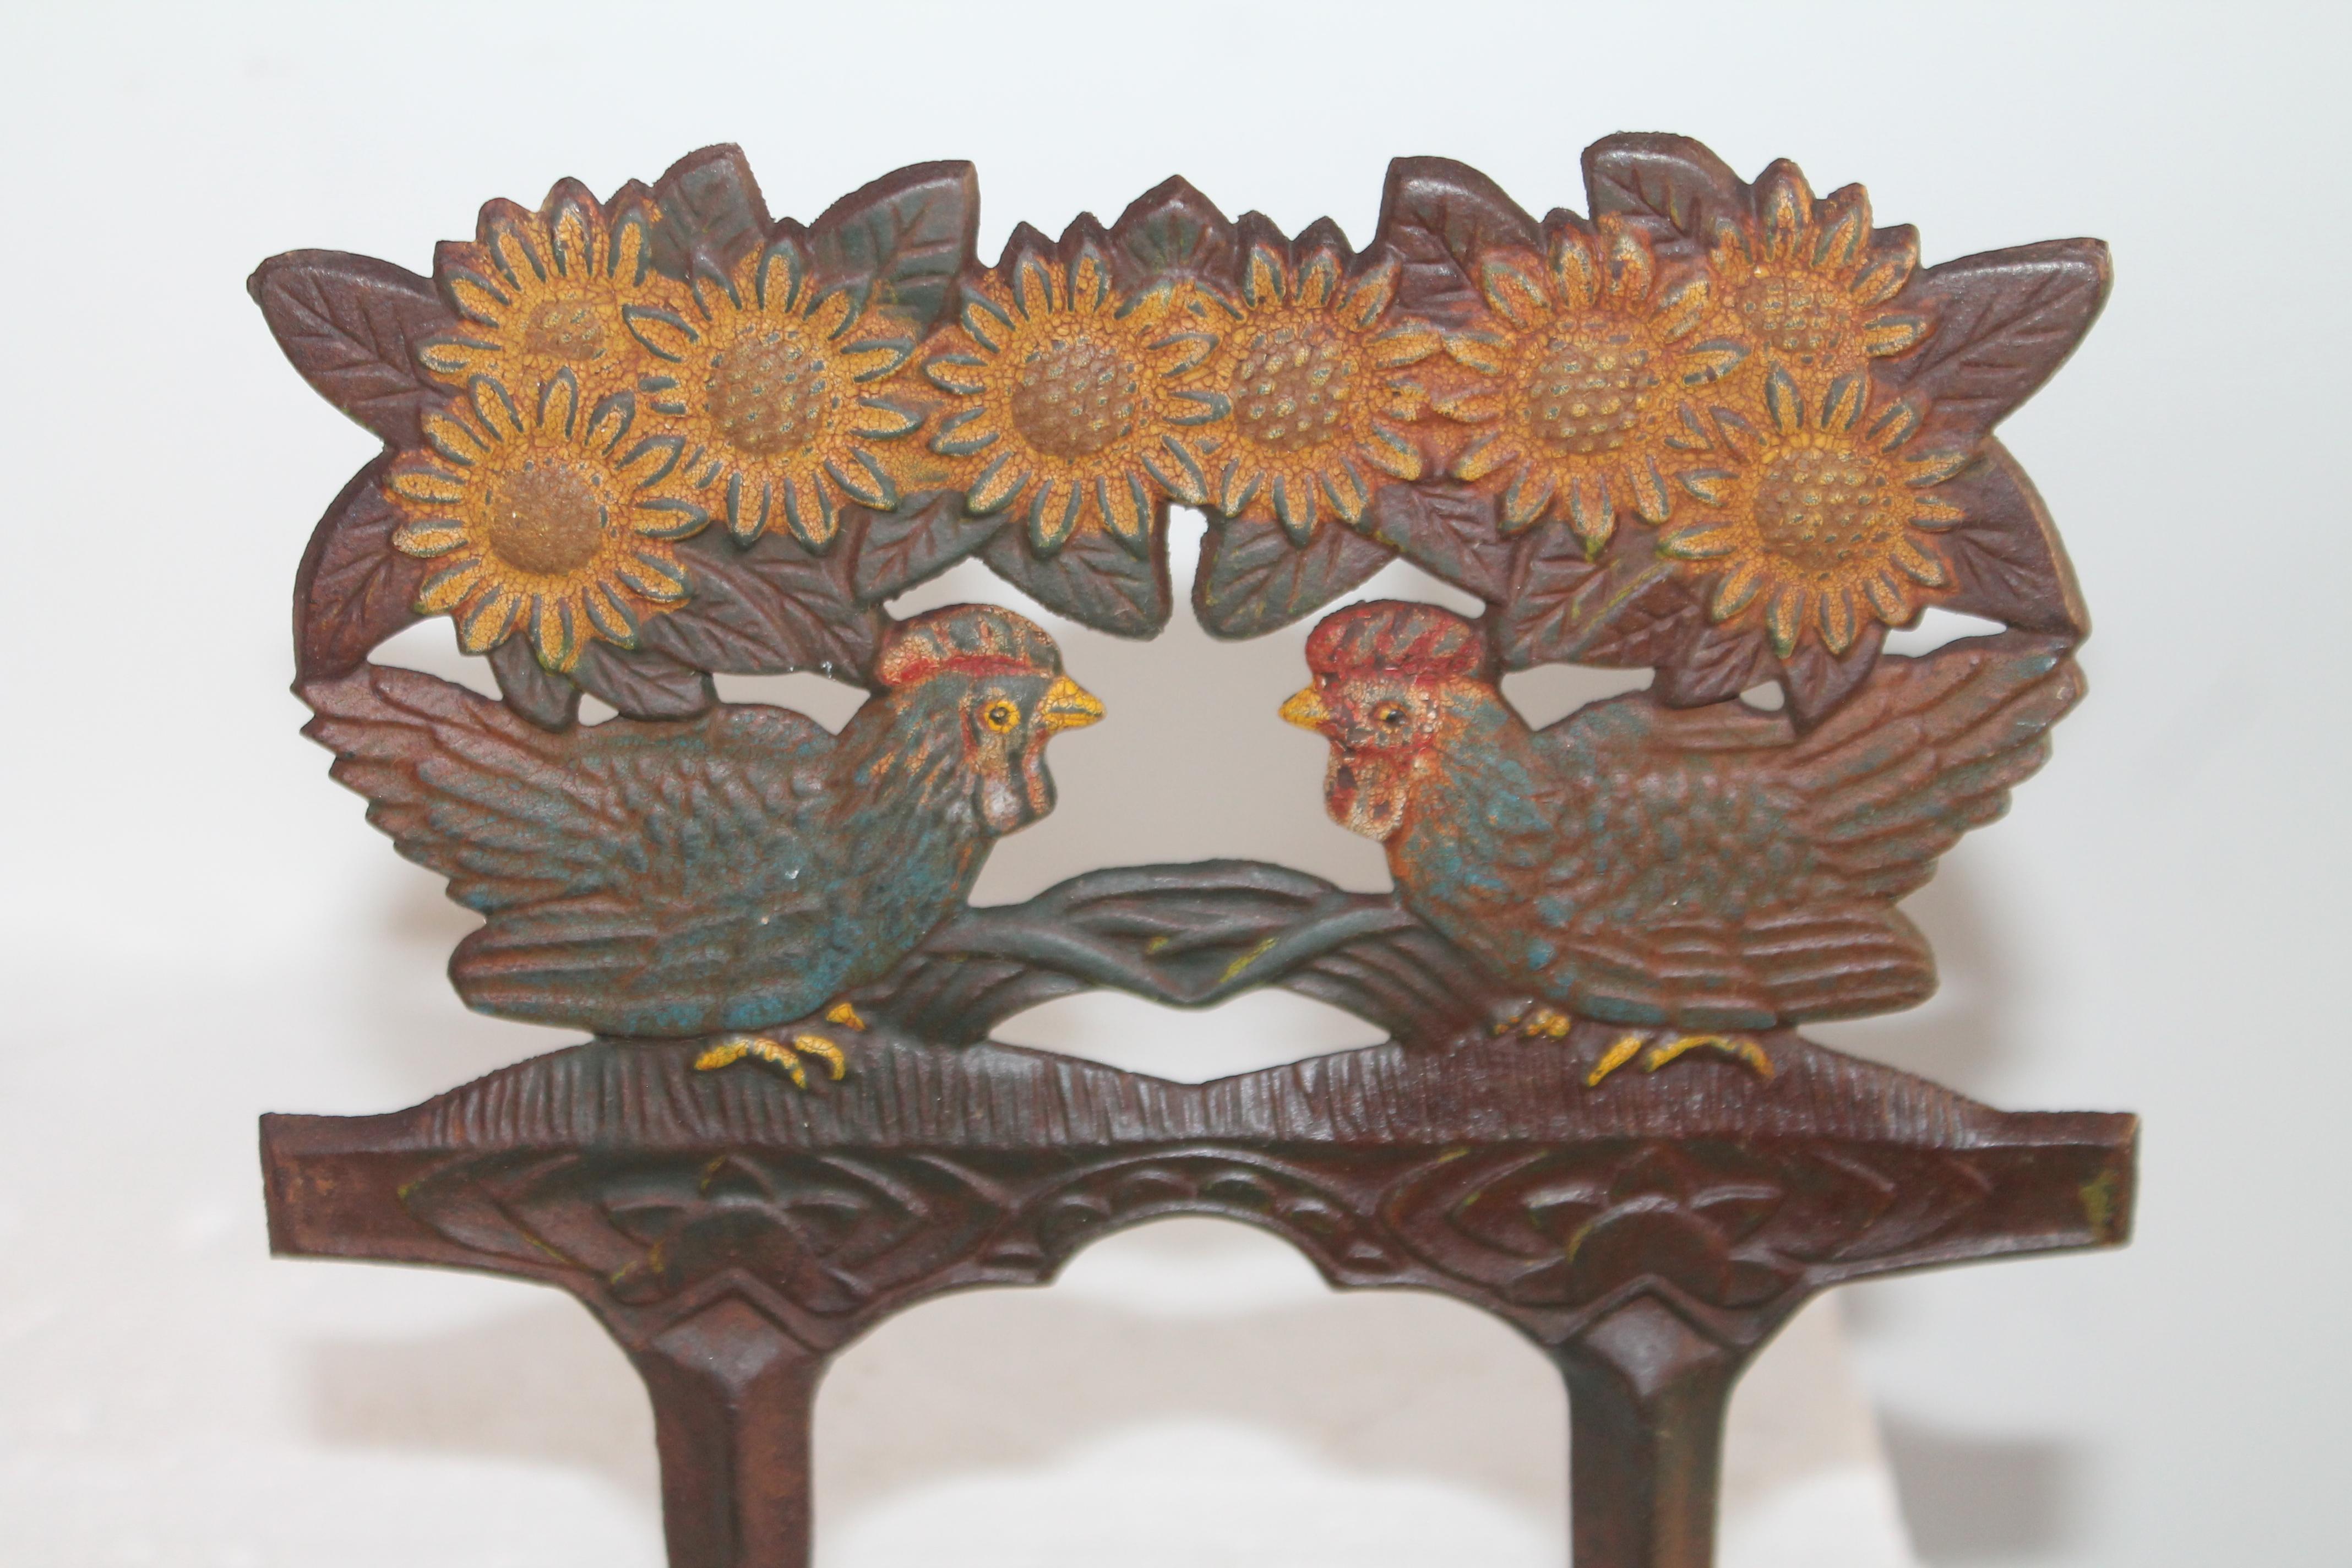 Original painted iron garden ornament with roosters and daisy's in good condition.